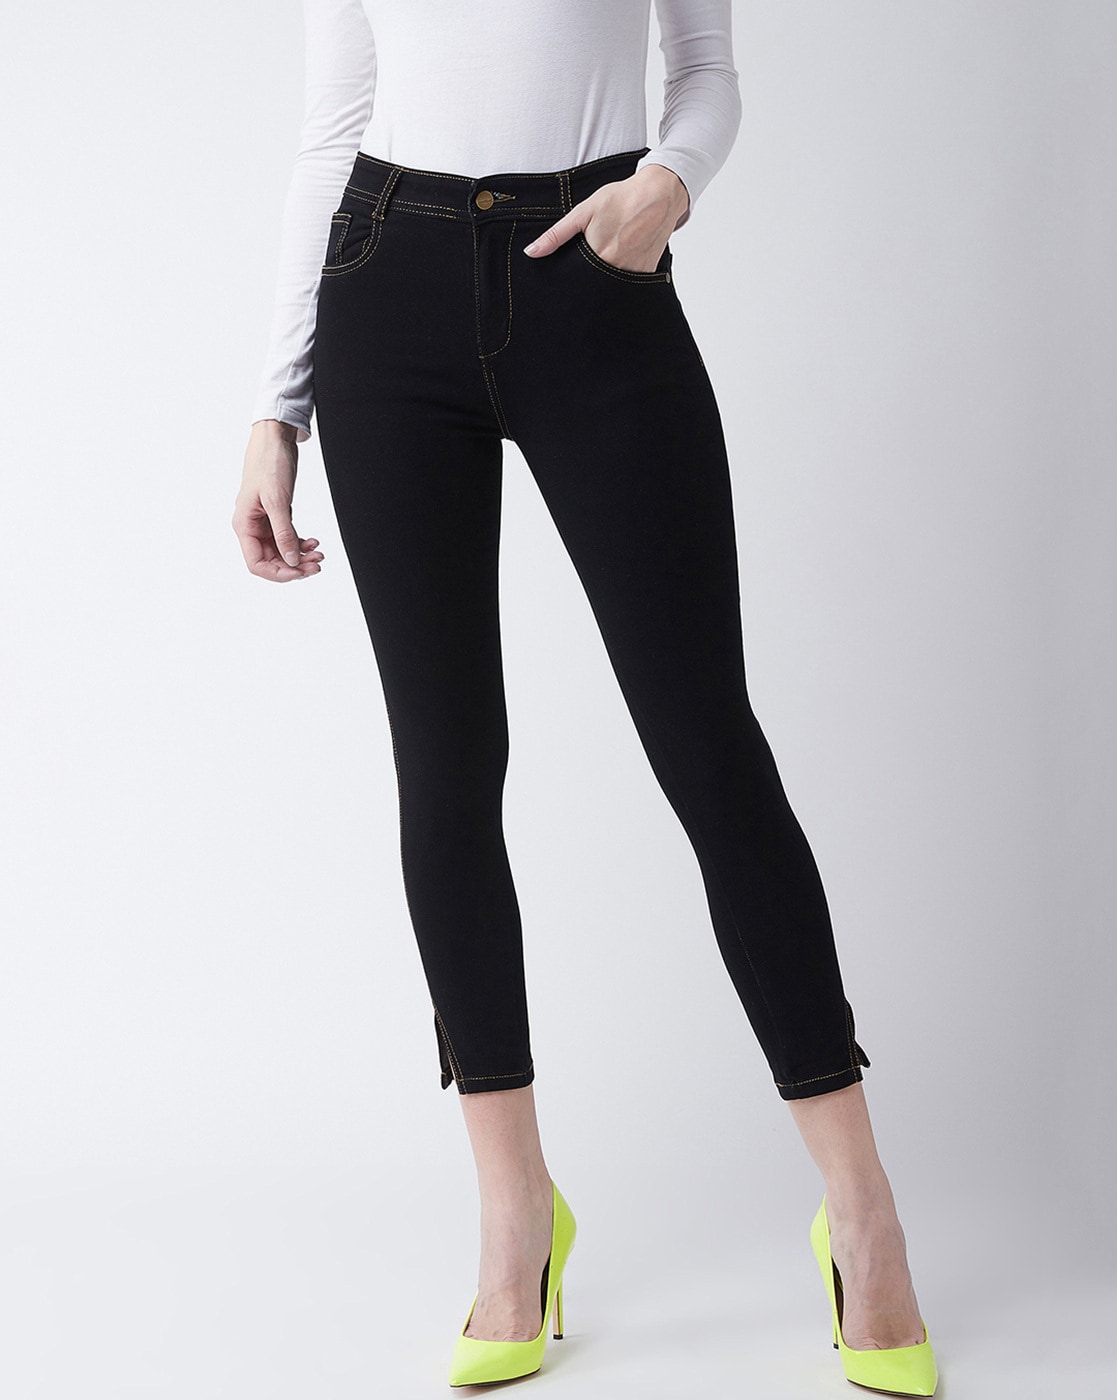 Buy Black Jeans & Jeggings for Women by MISS CHASE Online